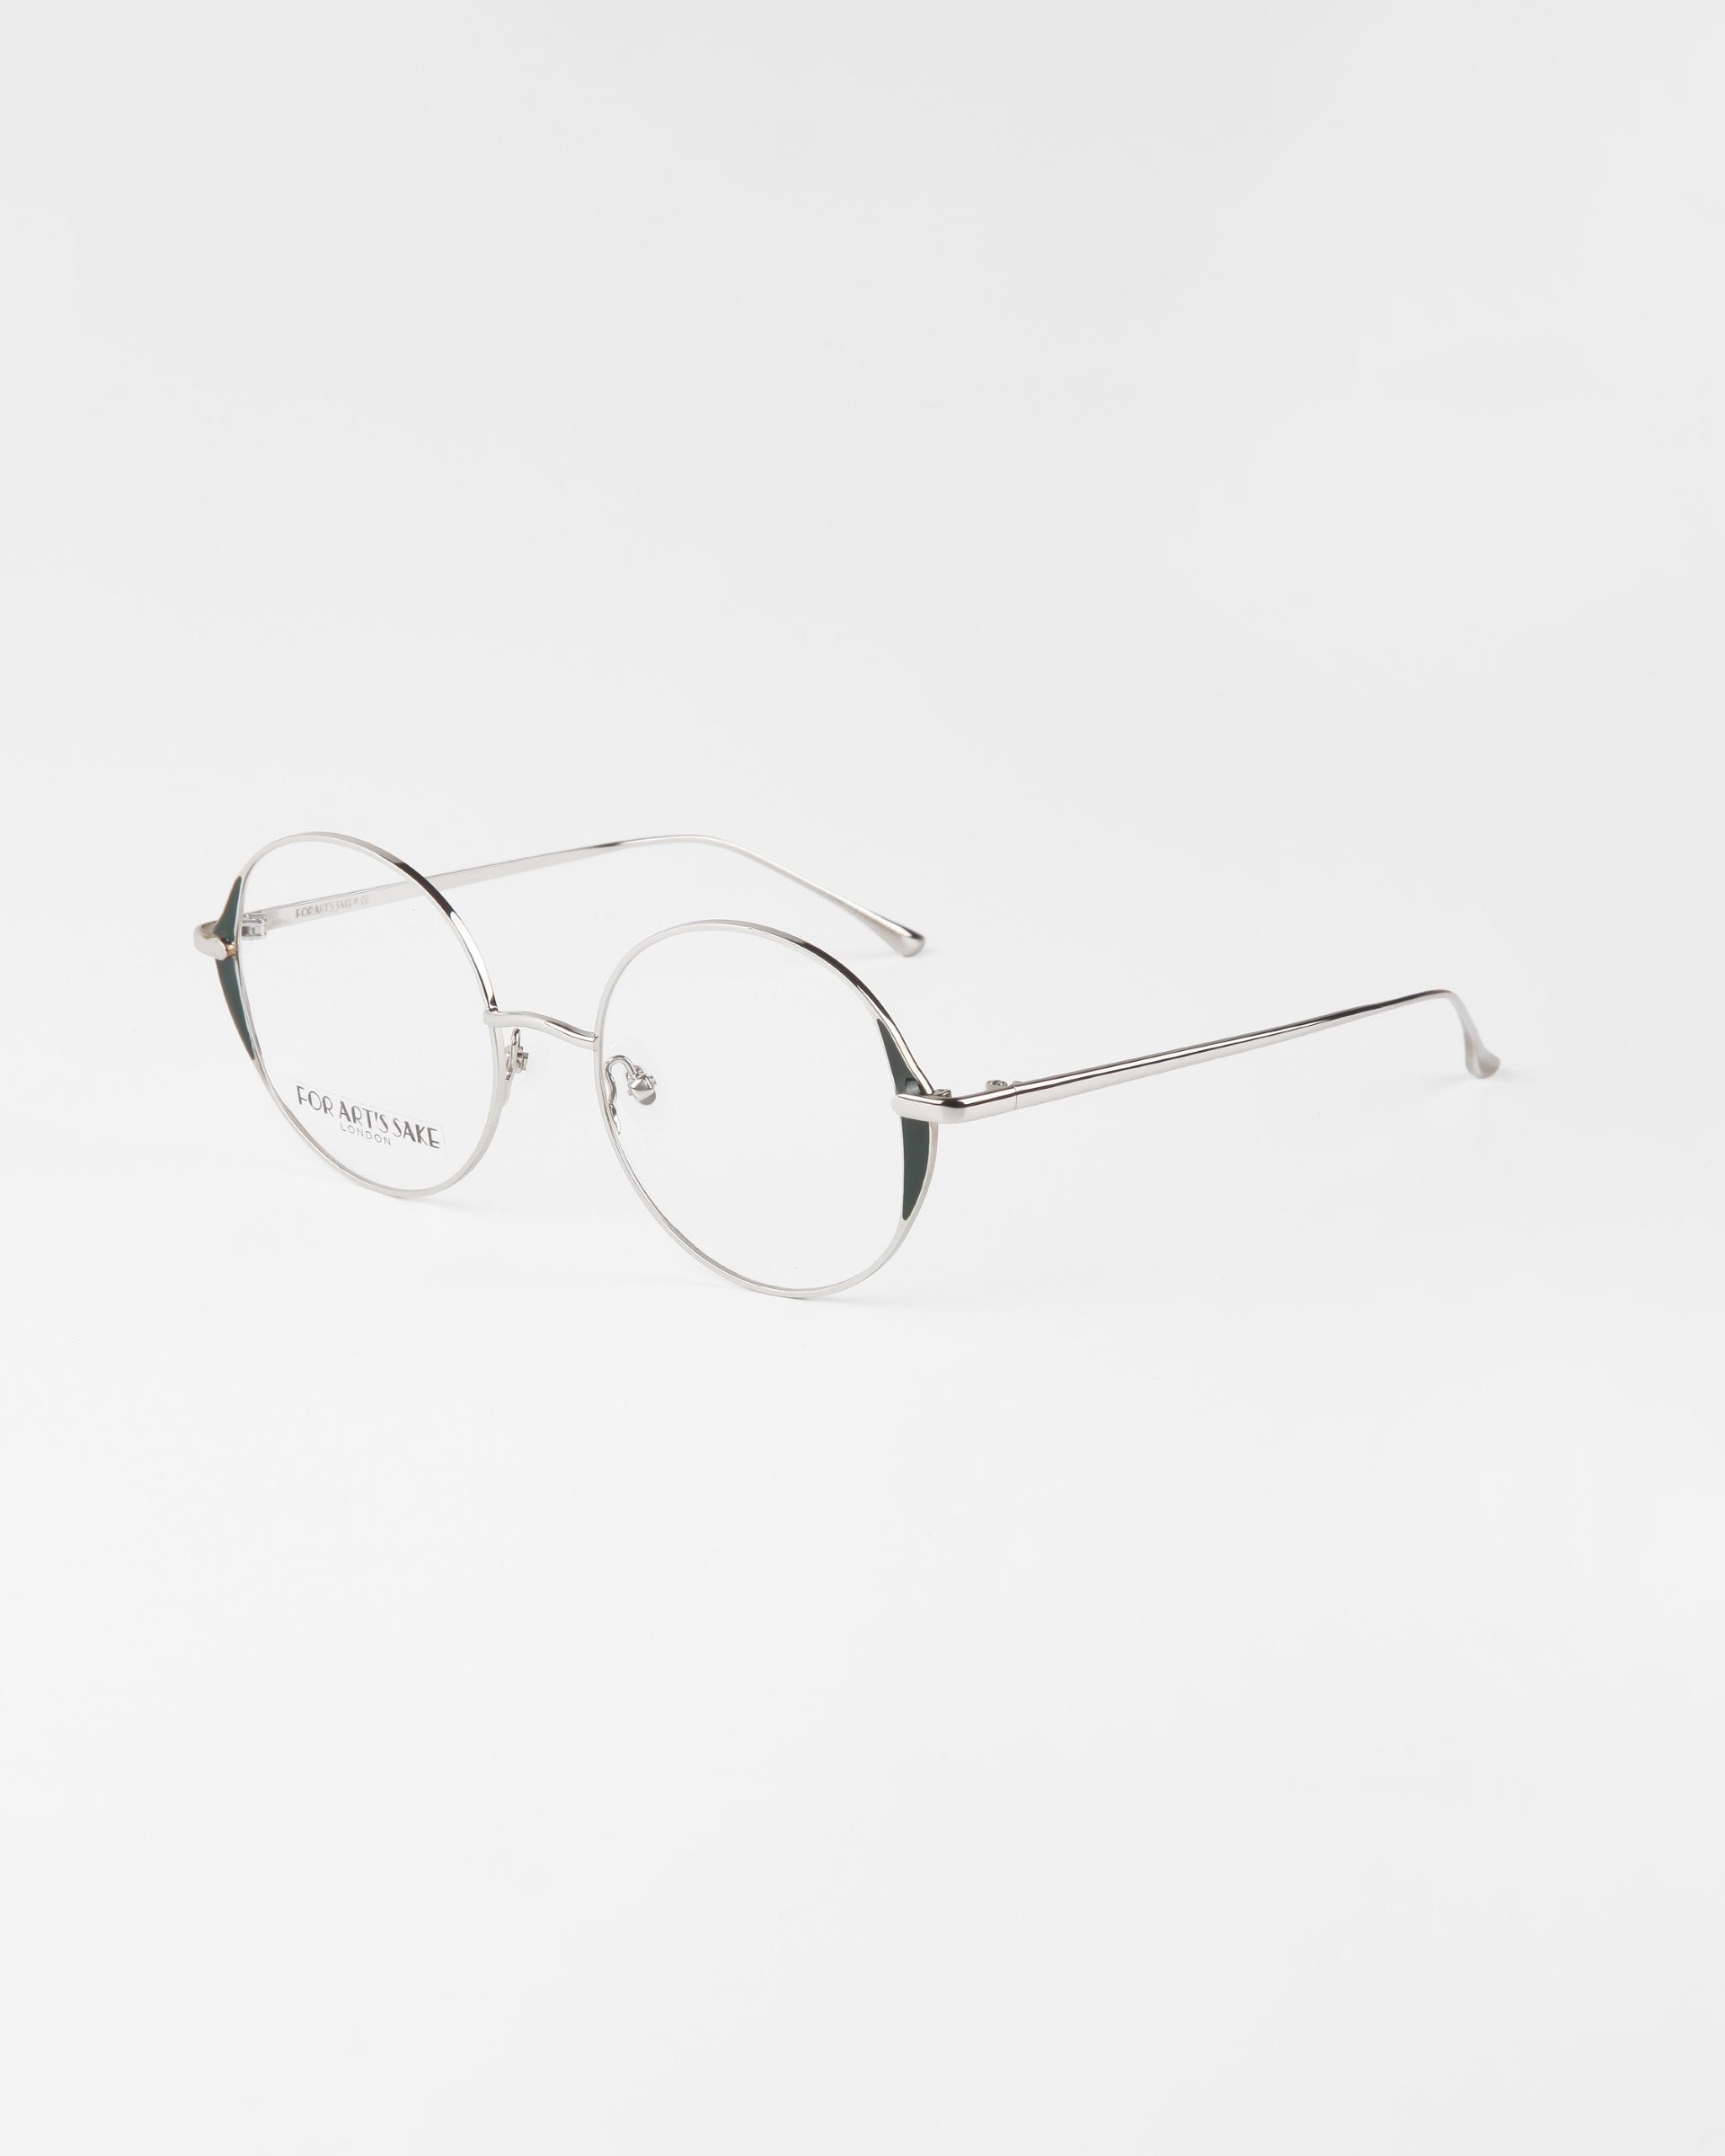 A pair of minimalist, round-framed eyeglasses with thin silver metallic frames and blue light filter lenses. The Kos glasses by For Art&#39;s Sake® rest on a white surface with a light grey background.